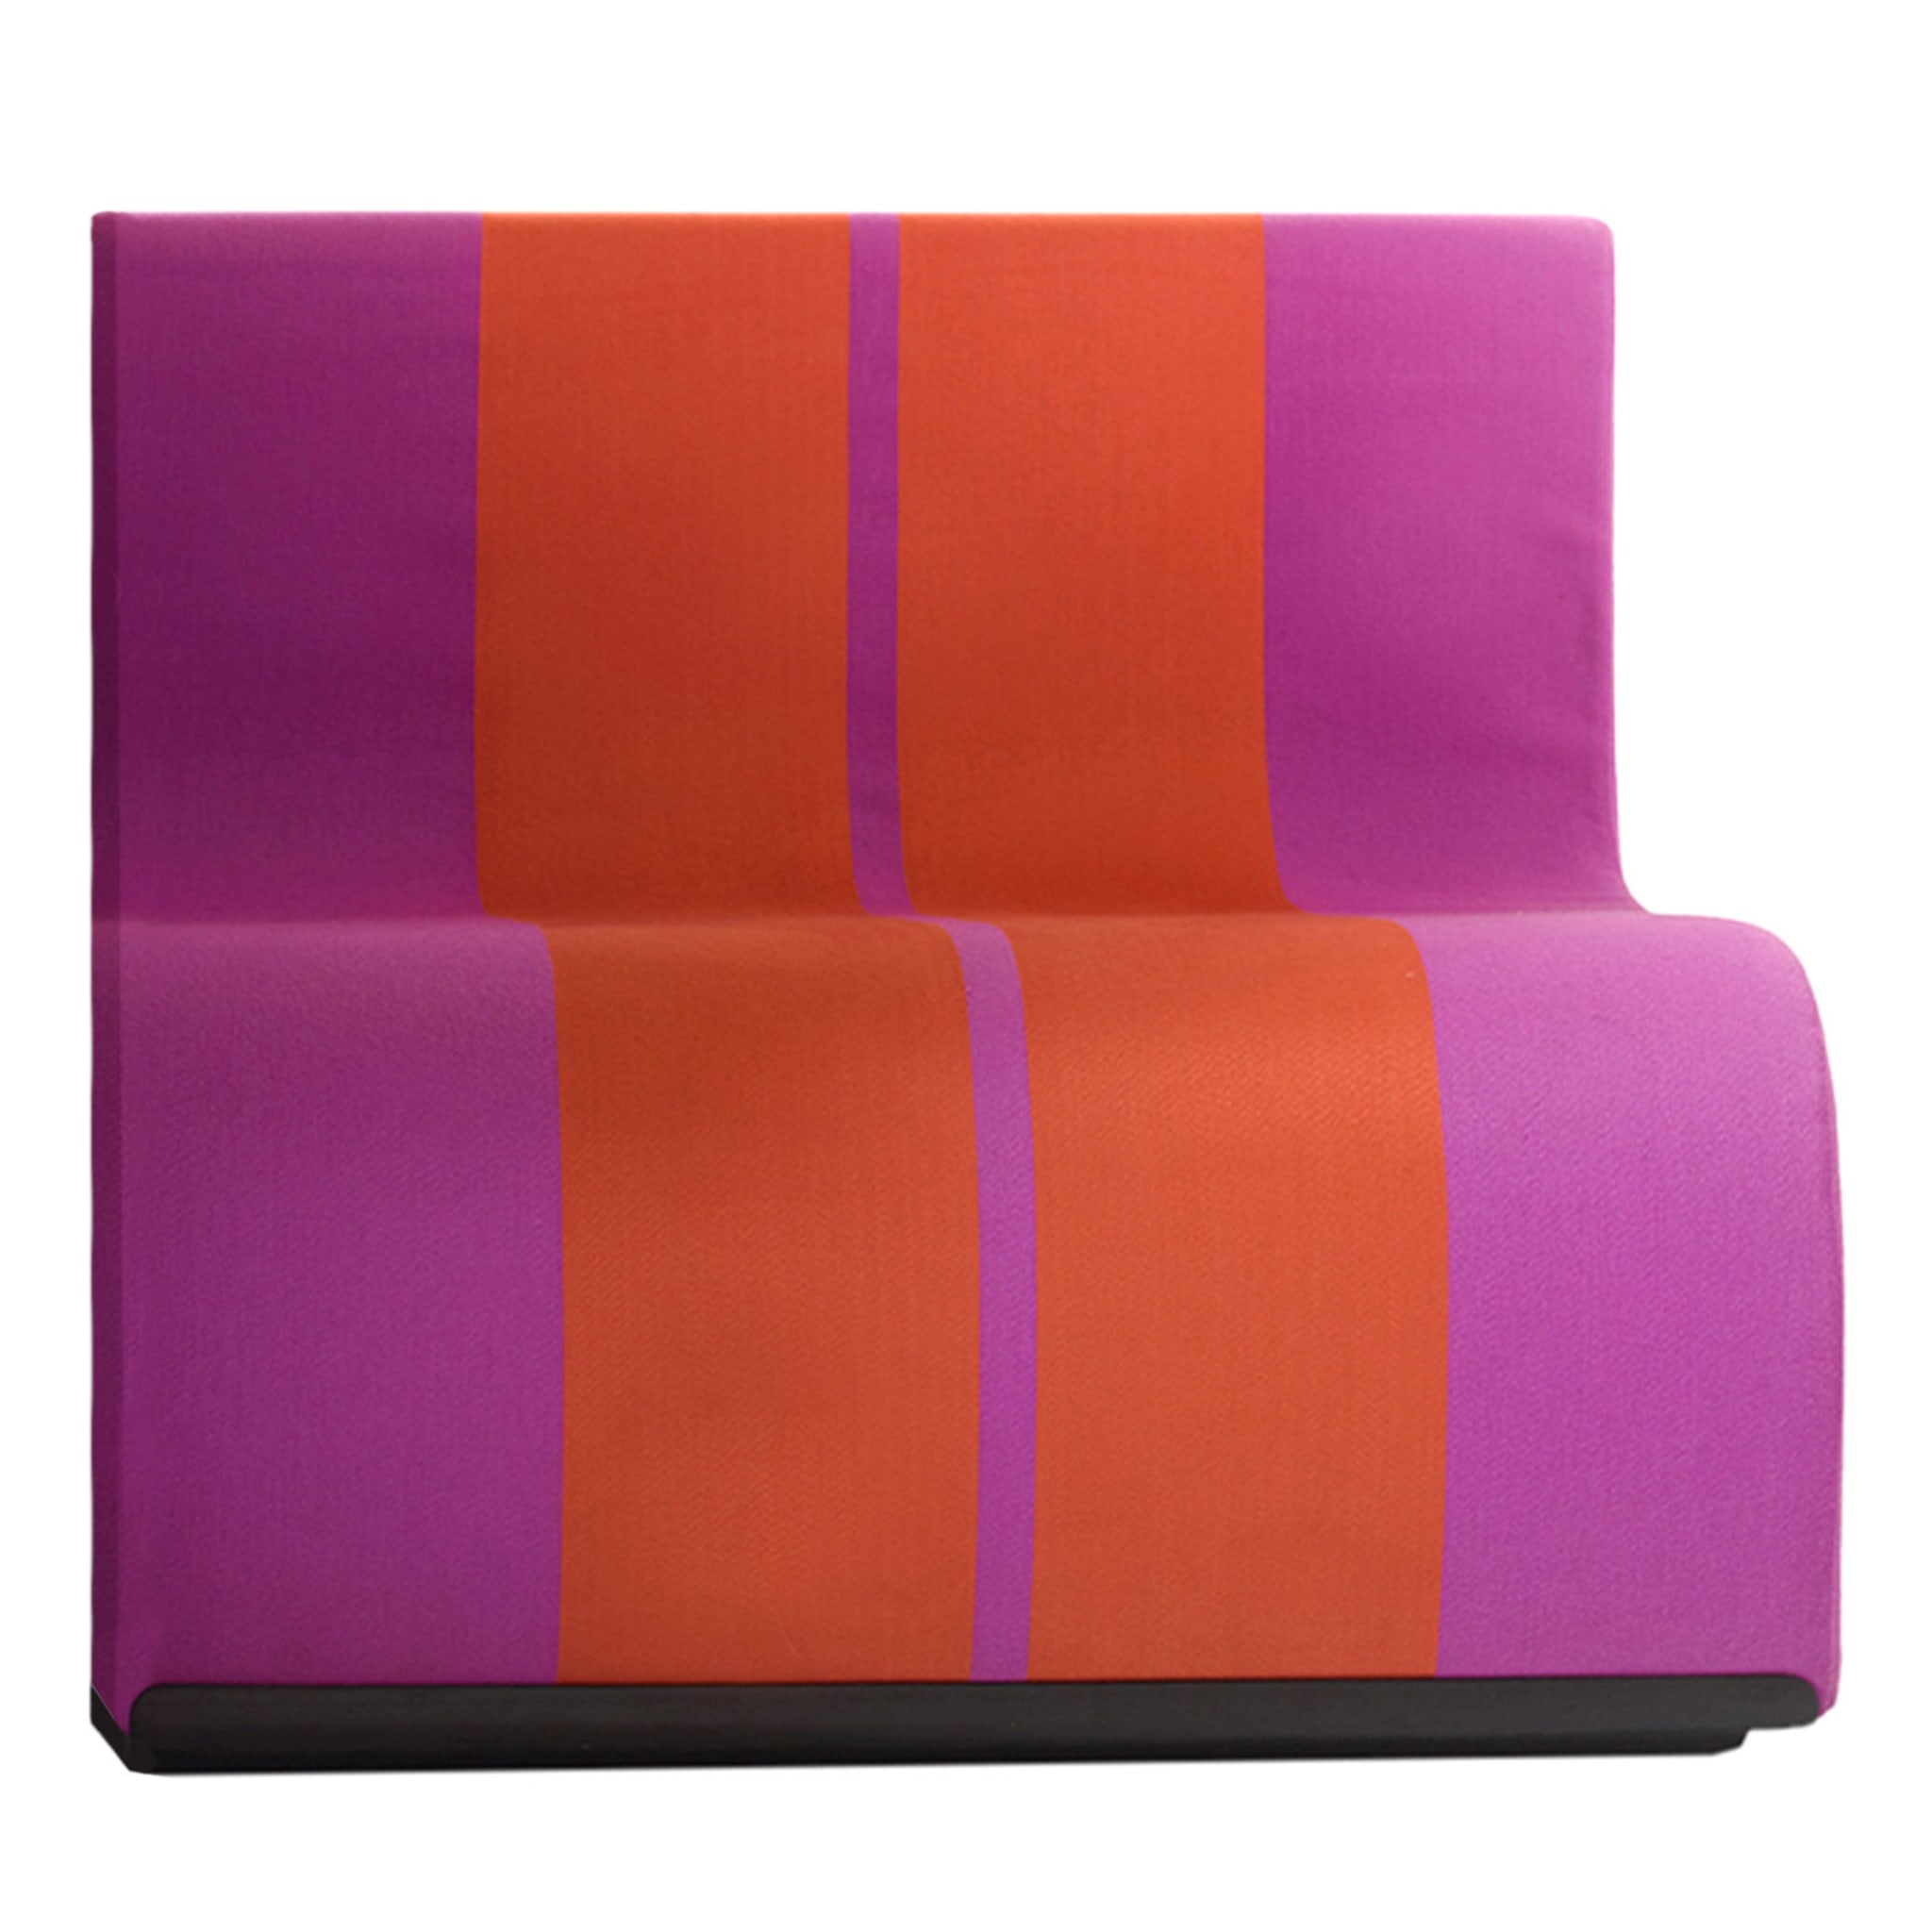 Sofo Purple and Red Armchair - Main view